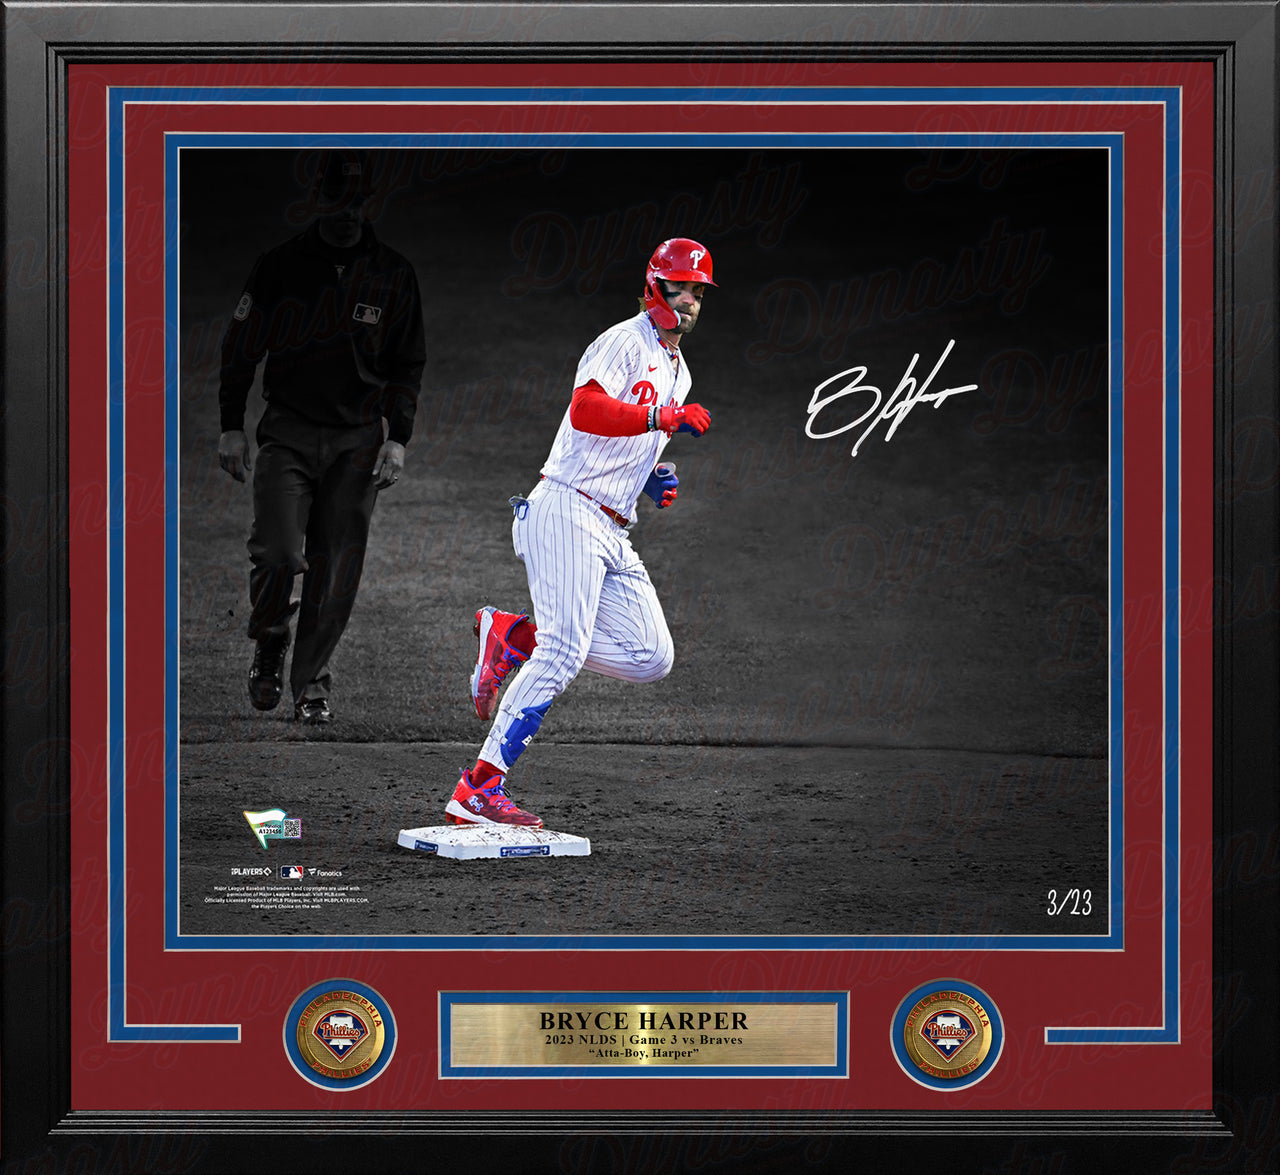 Bryce Harper Stares Down Arcia Philadelphia Phillies Autographed 16x20 Framed Blackout Photo - #3/23